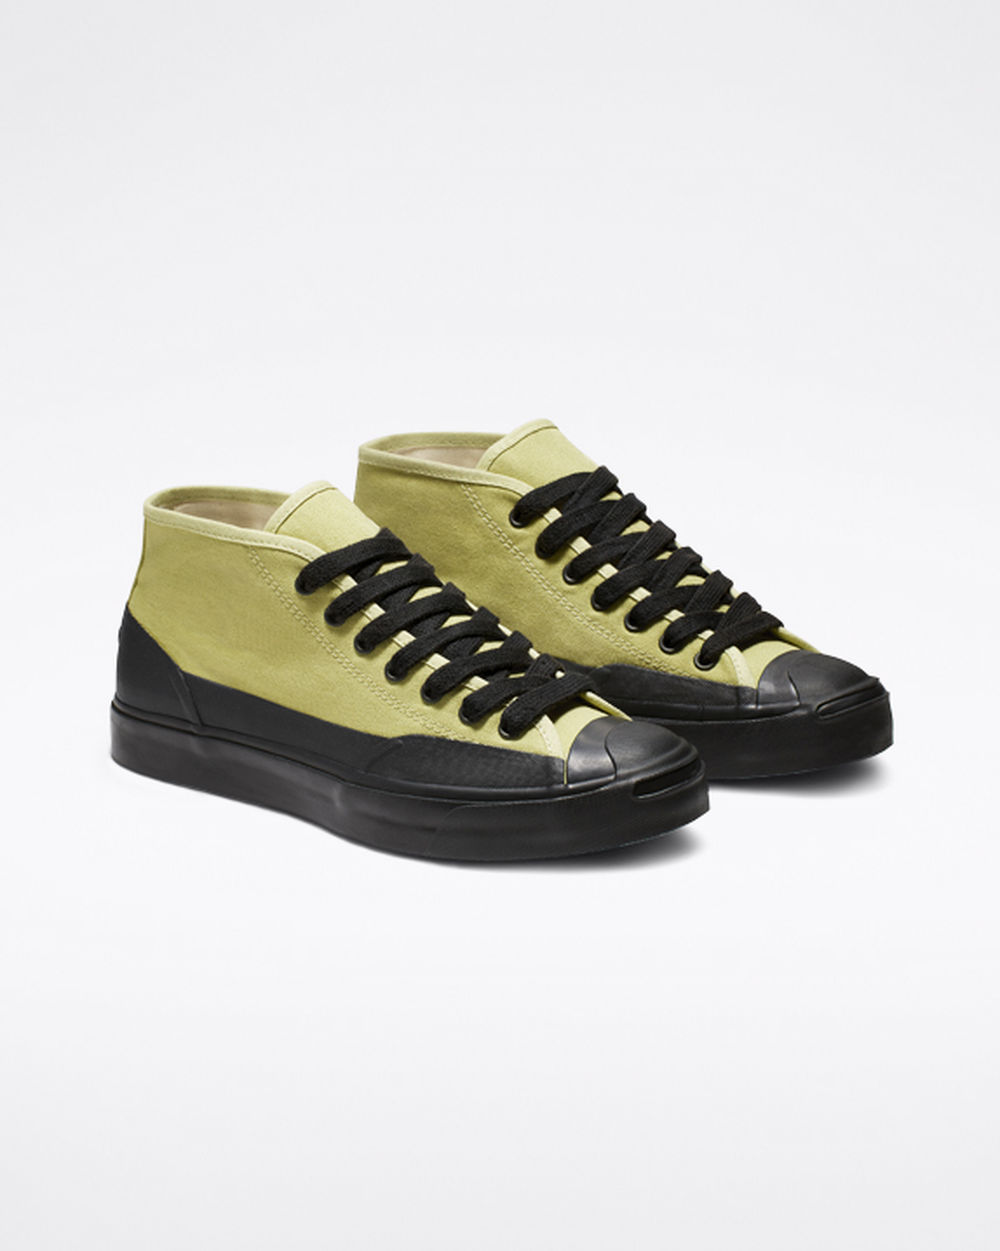 asap nast converse jack purcell